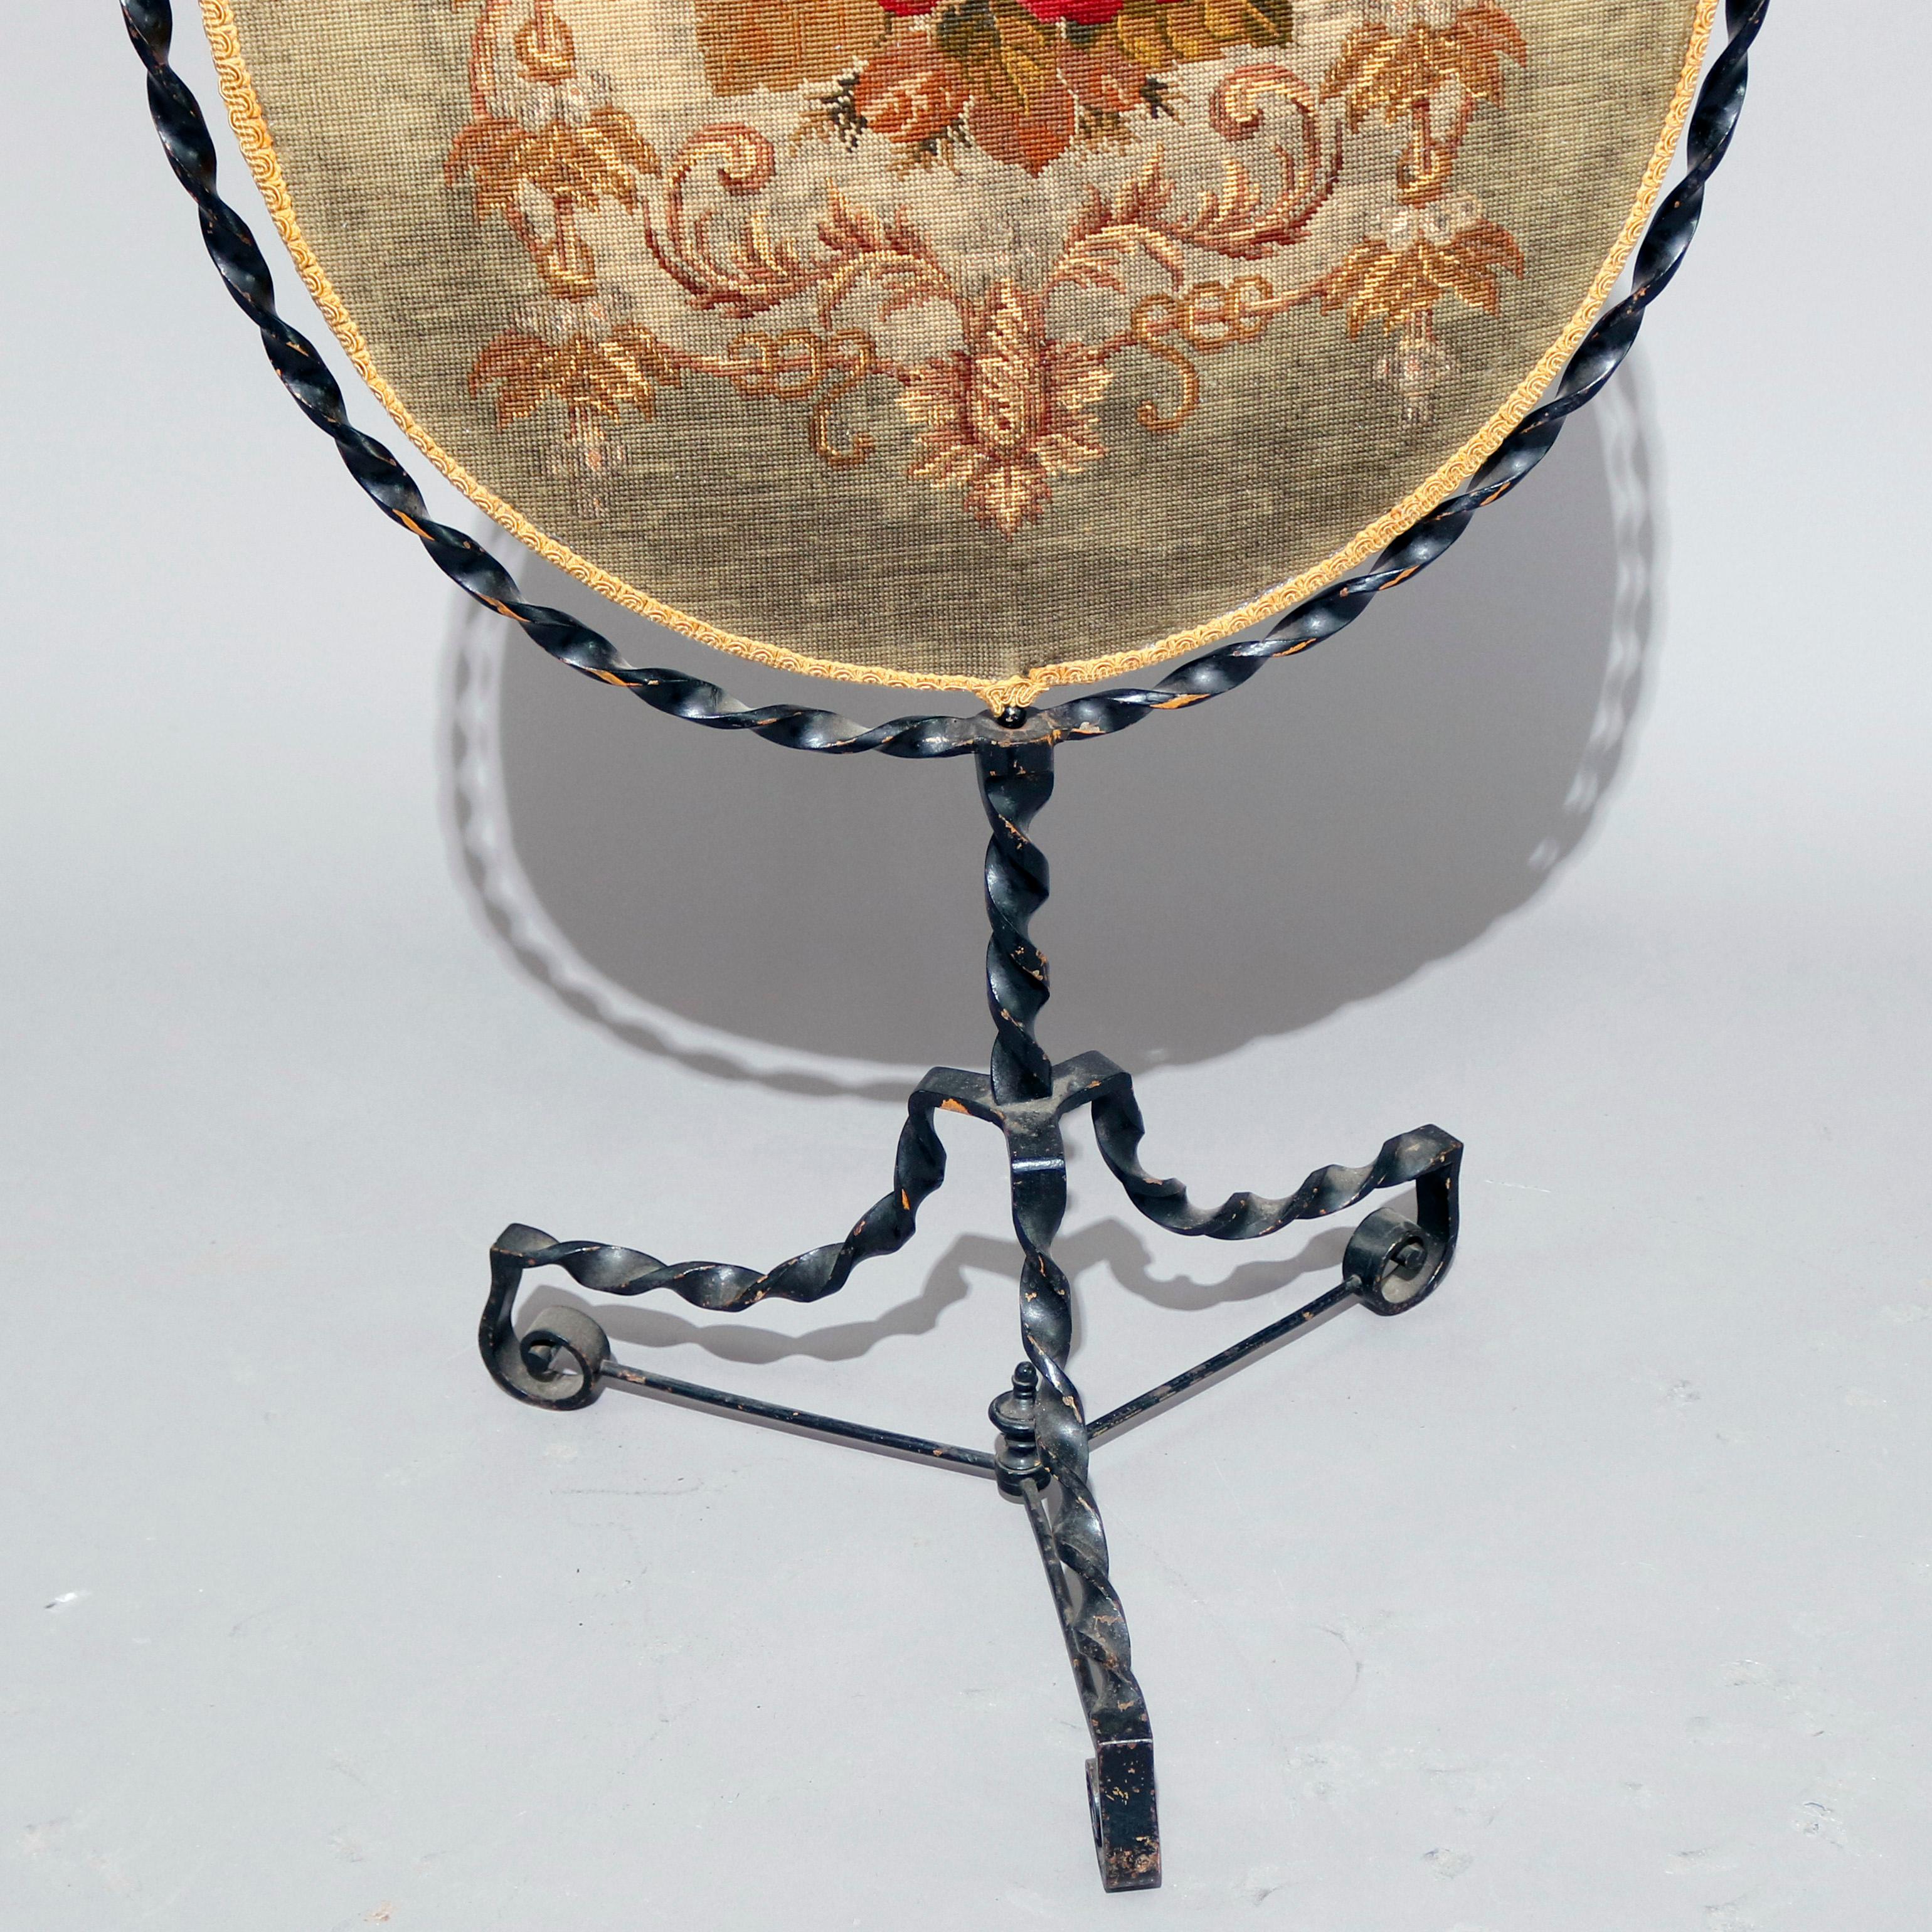 Needlepoint French Louis XV Wrought Iron and Floral Petite Point Fire Screen, circa 1880